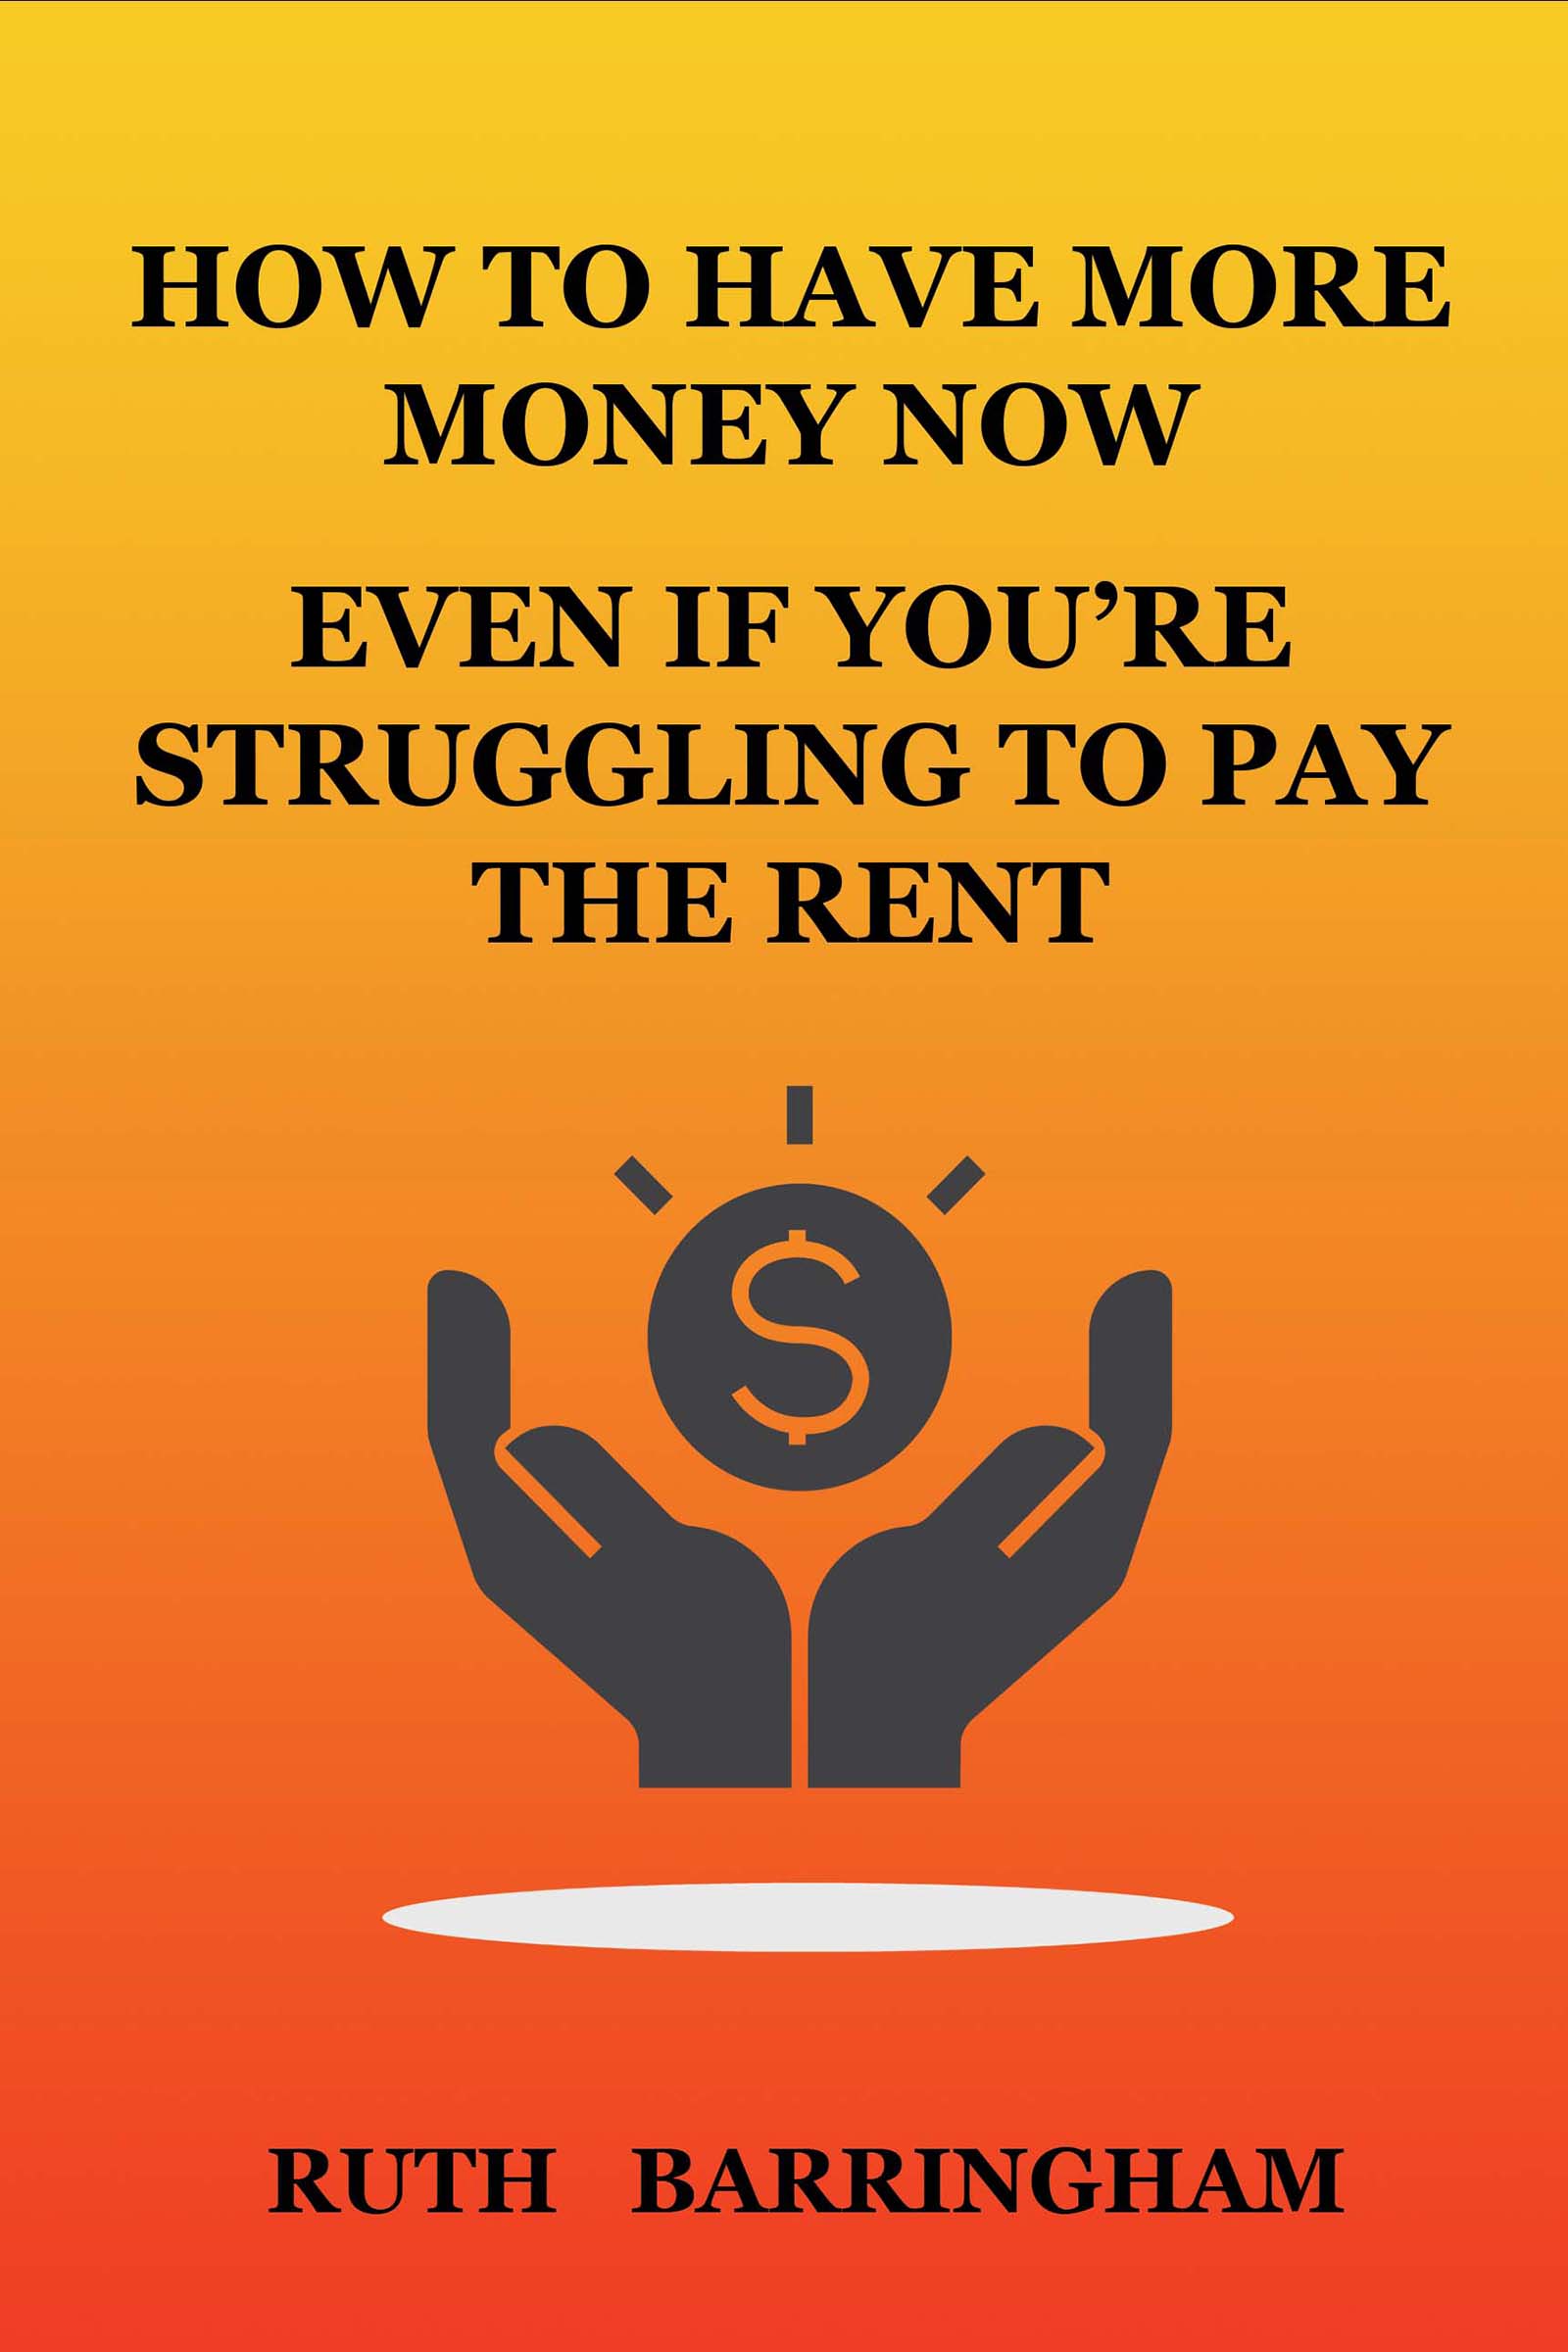 How To Have More Money Now - Even If You’re Struggling To Pay The Rent